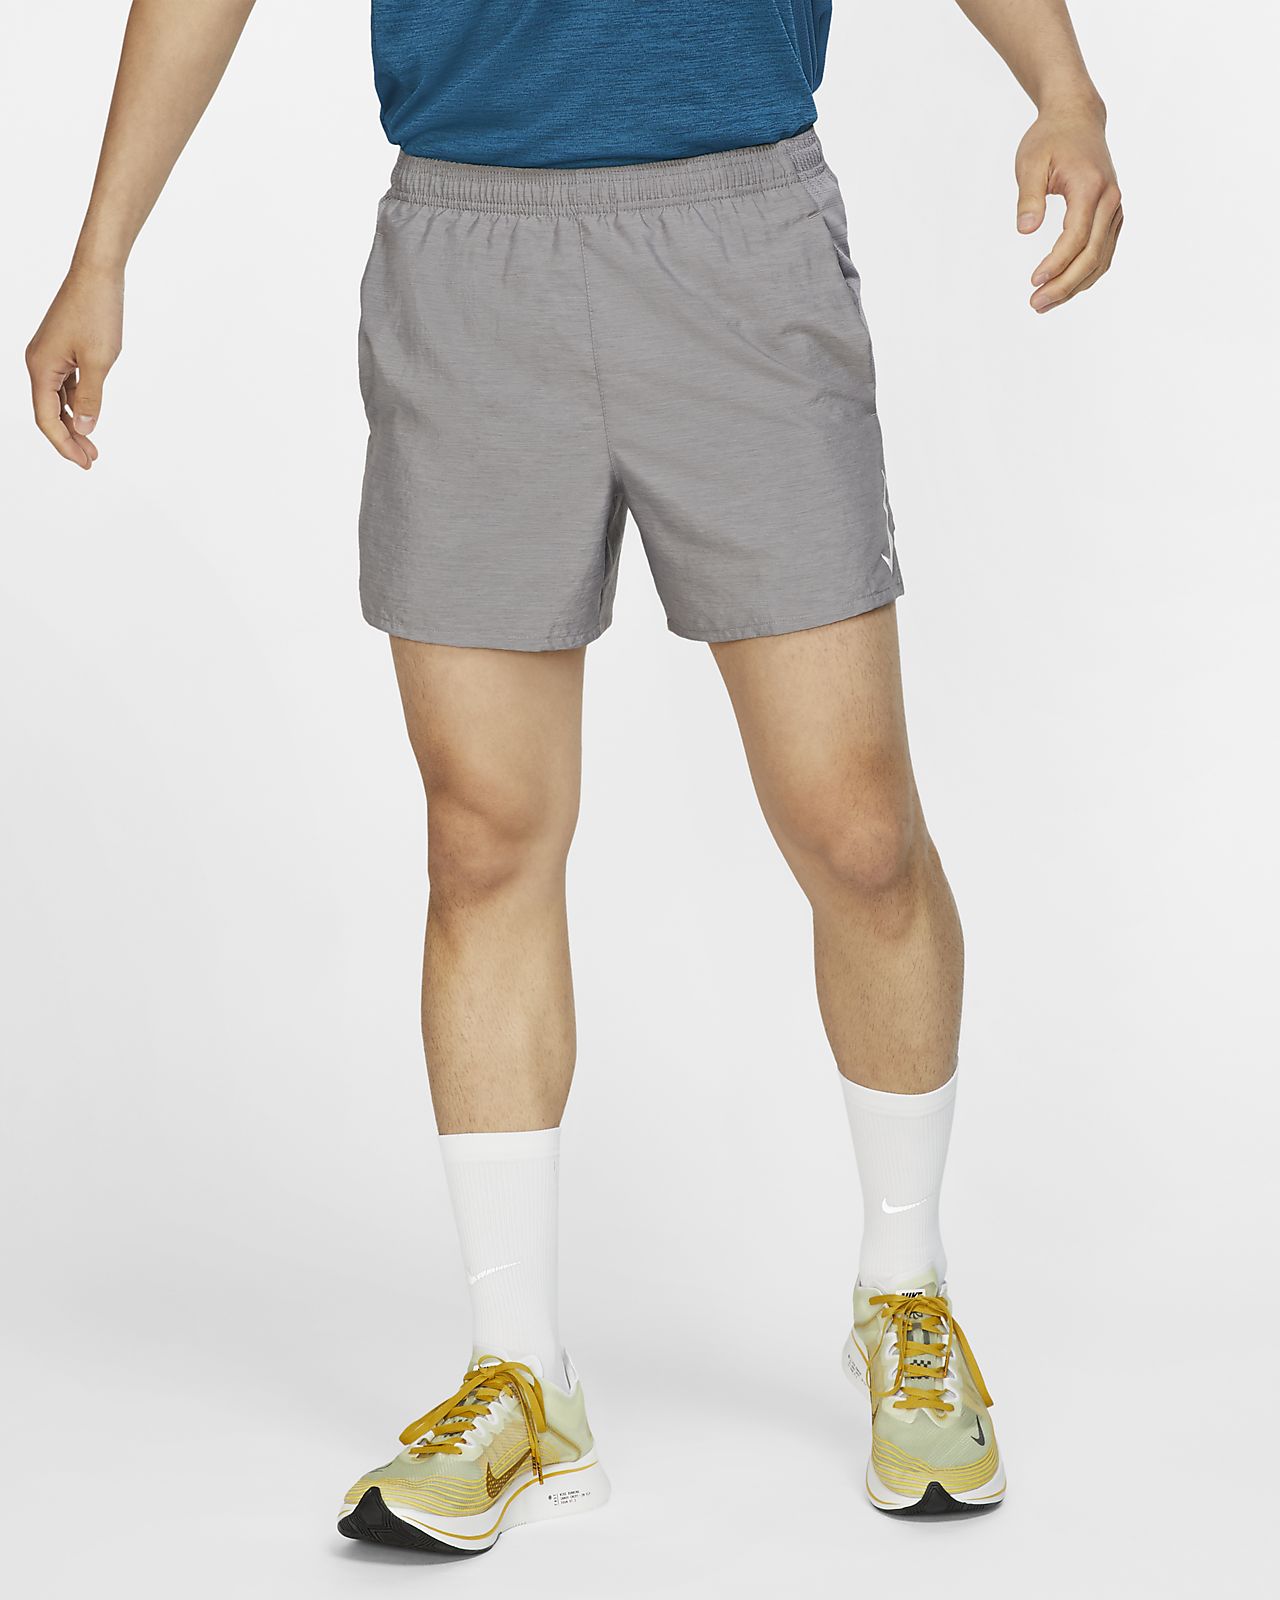 nike shorts with compression liner